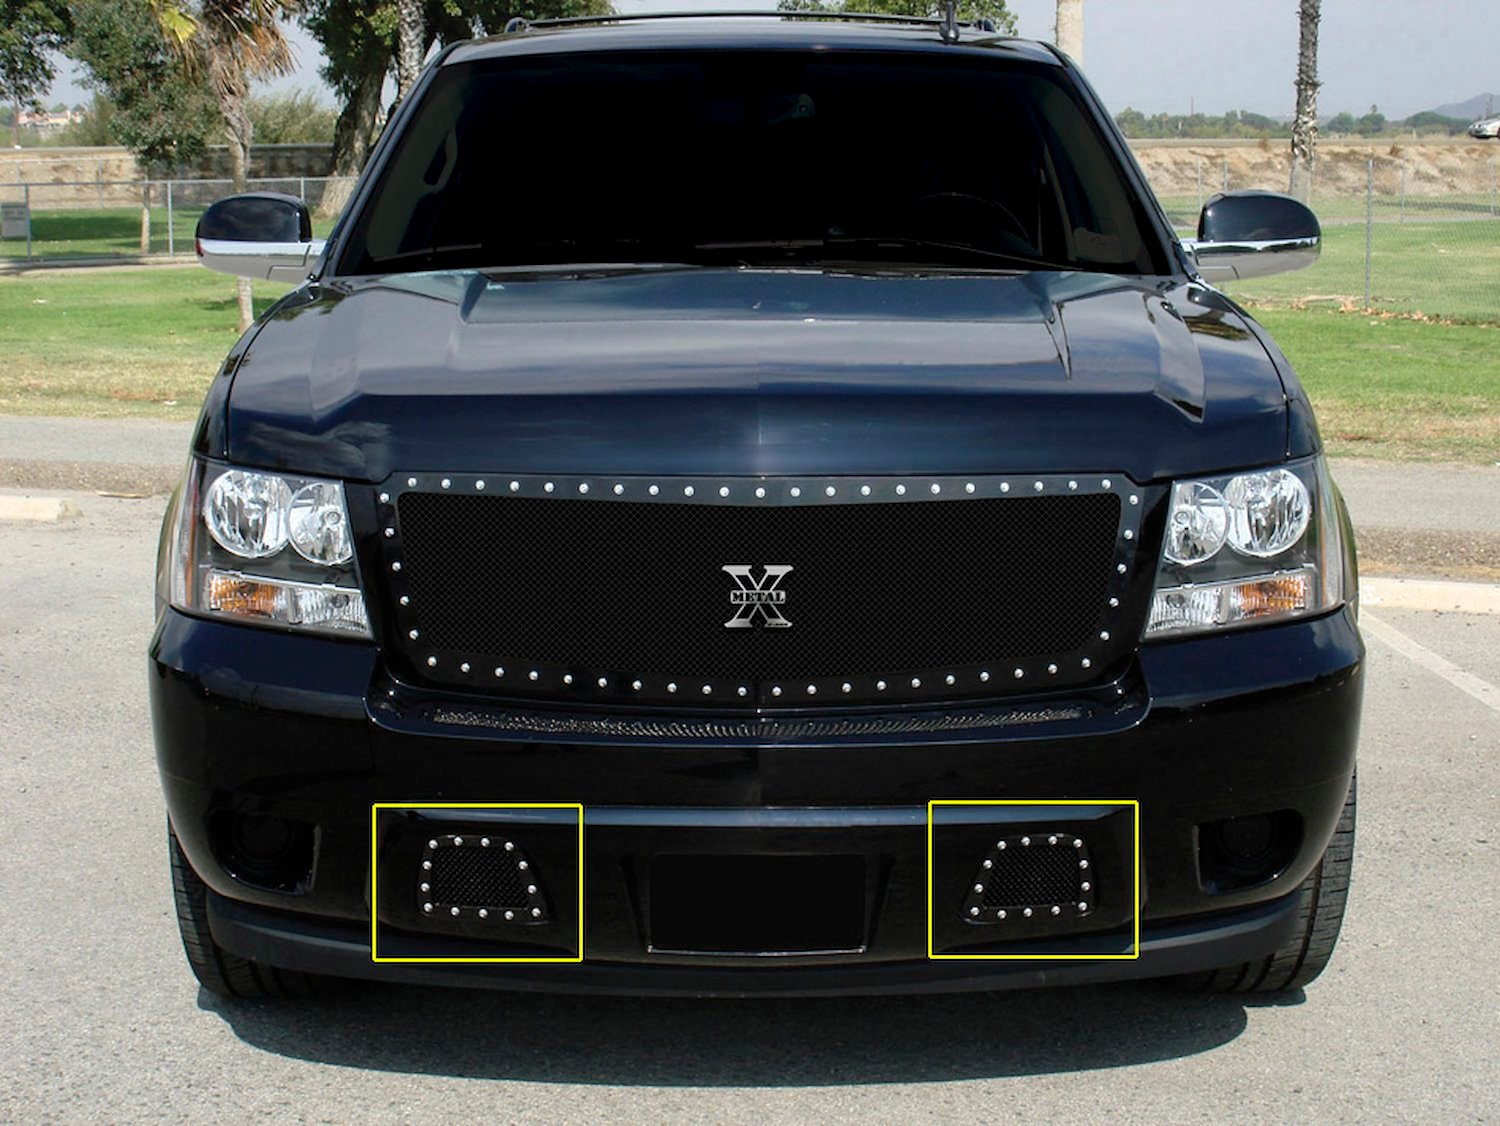 X-Metal Bumper Grille 2007-2014 Chevy Tahoe/Suburban/Avalanche